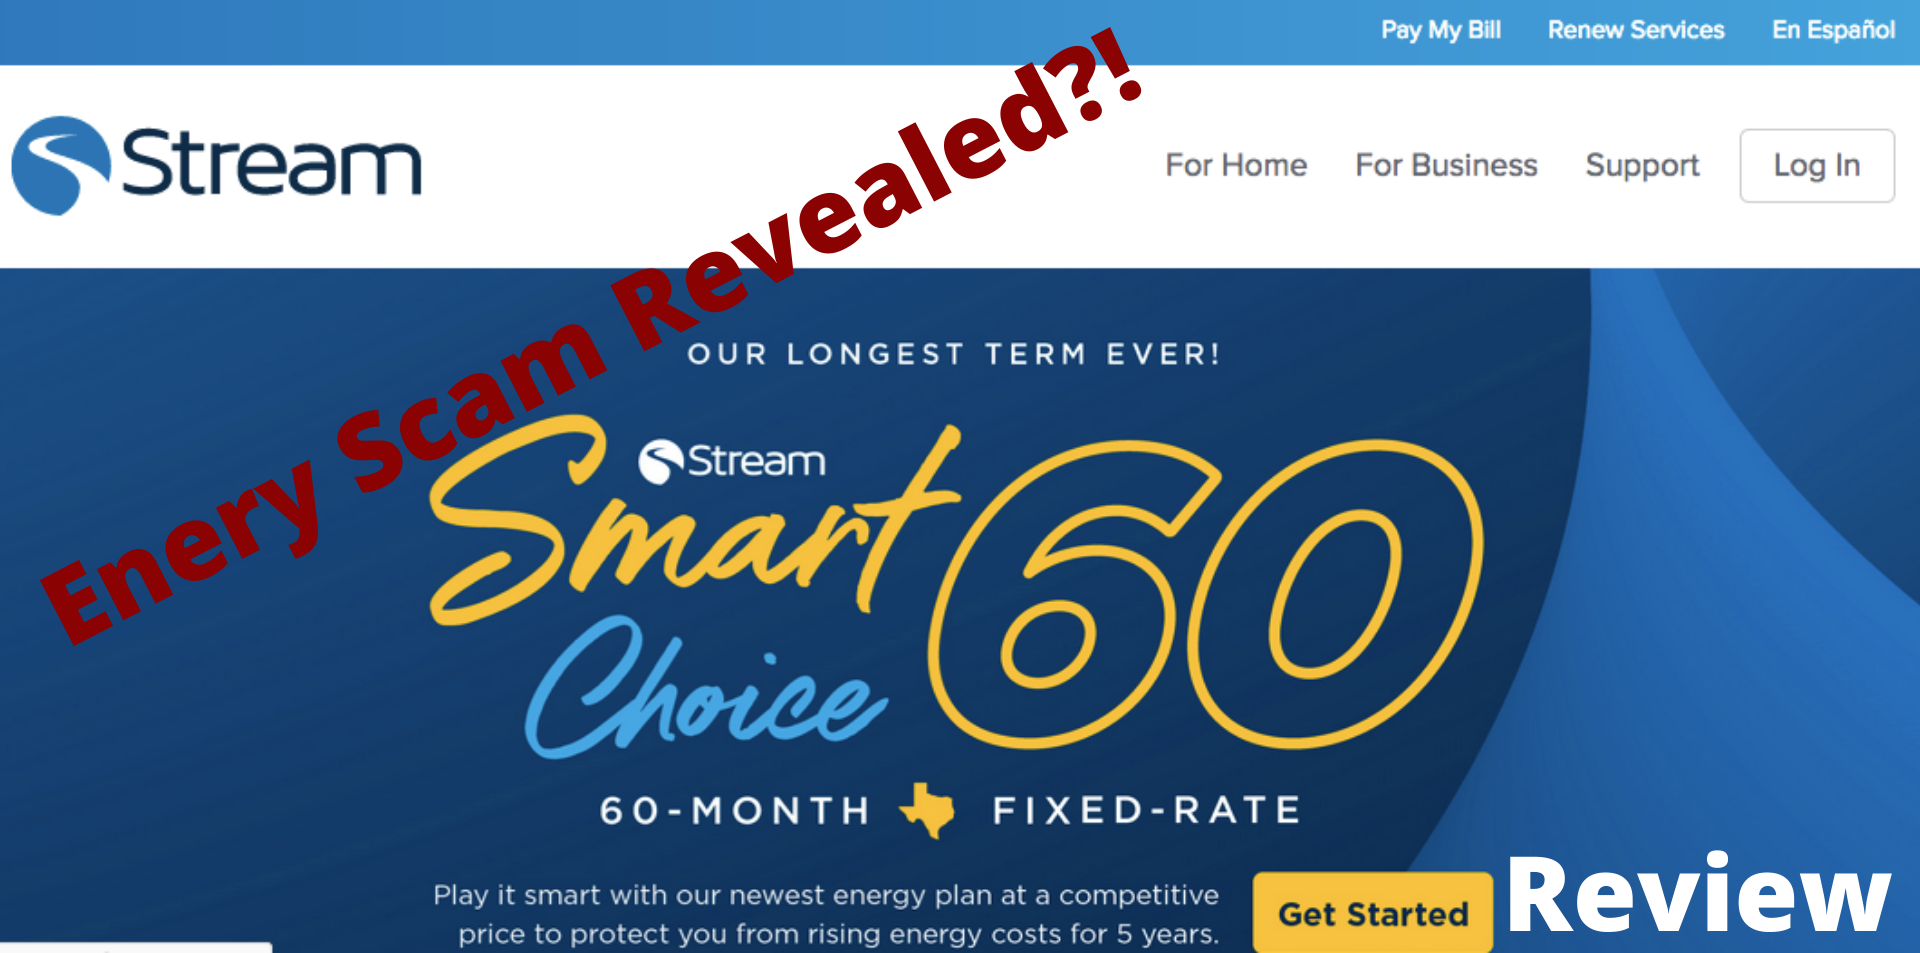 Energ scam revealed: My Stream Energy frontpage